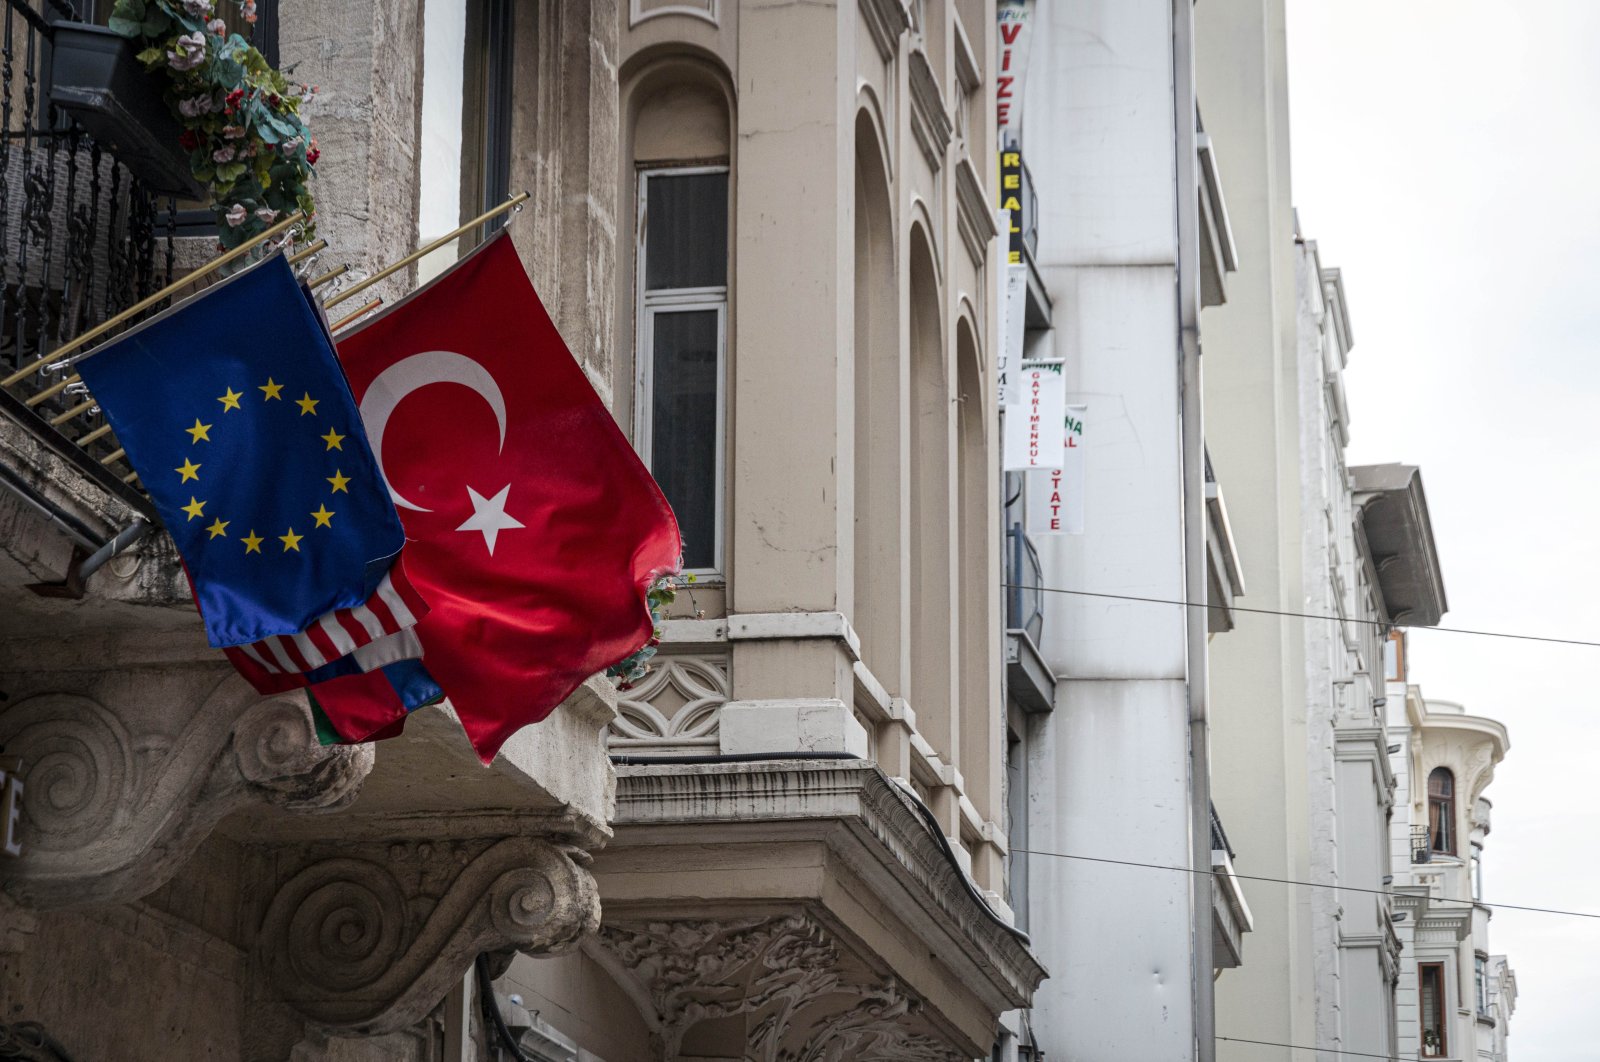 The European Union and Turkish flags fly side by side on Istiklal Avenue, Istanbul, Turkey, Sept. 5, 2020. (Photo by Getty Images)